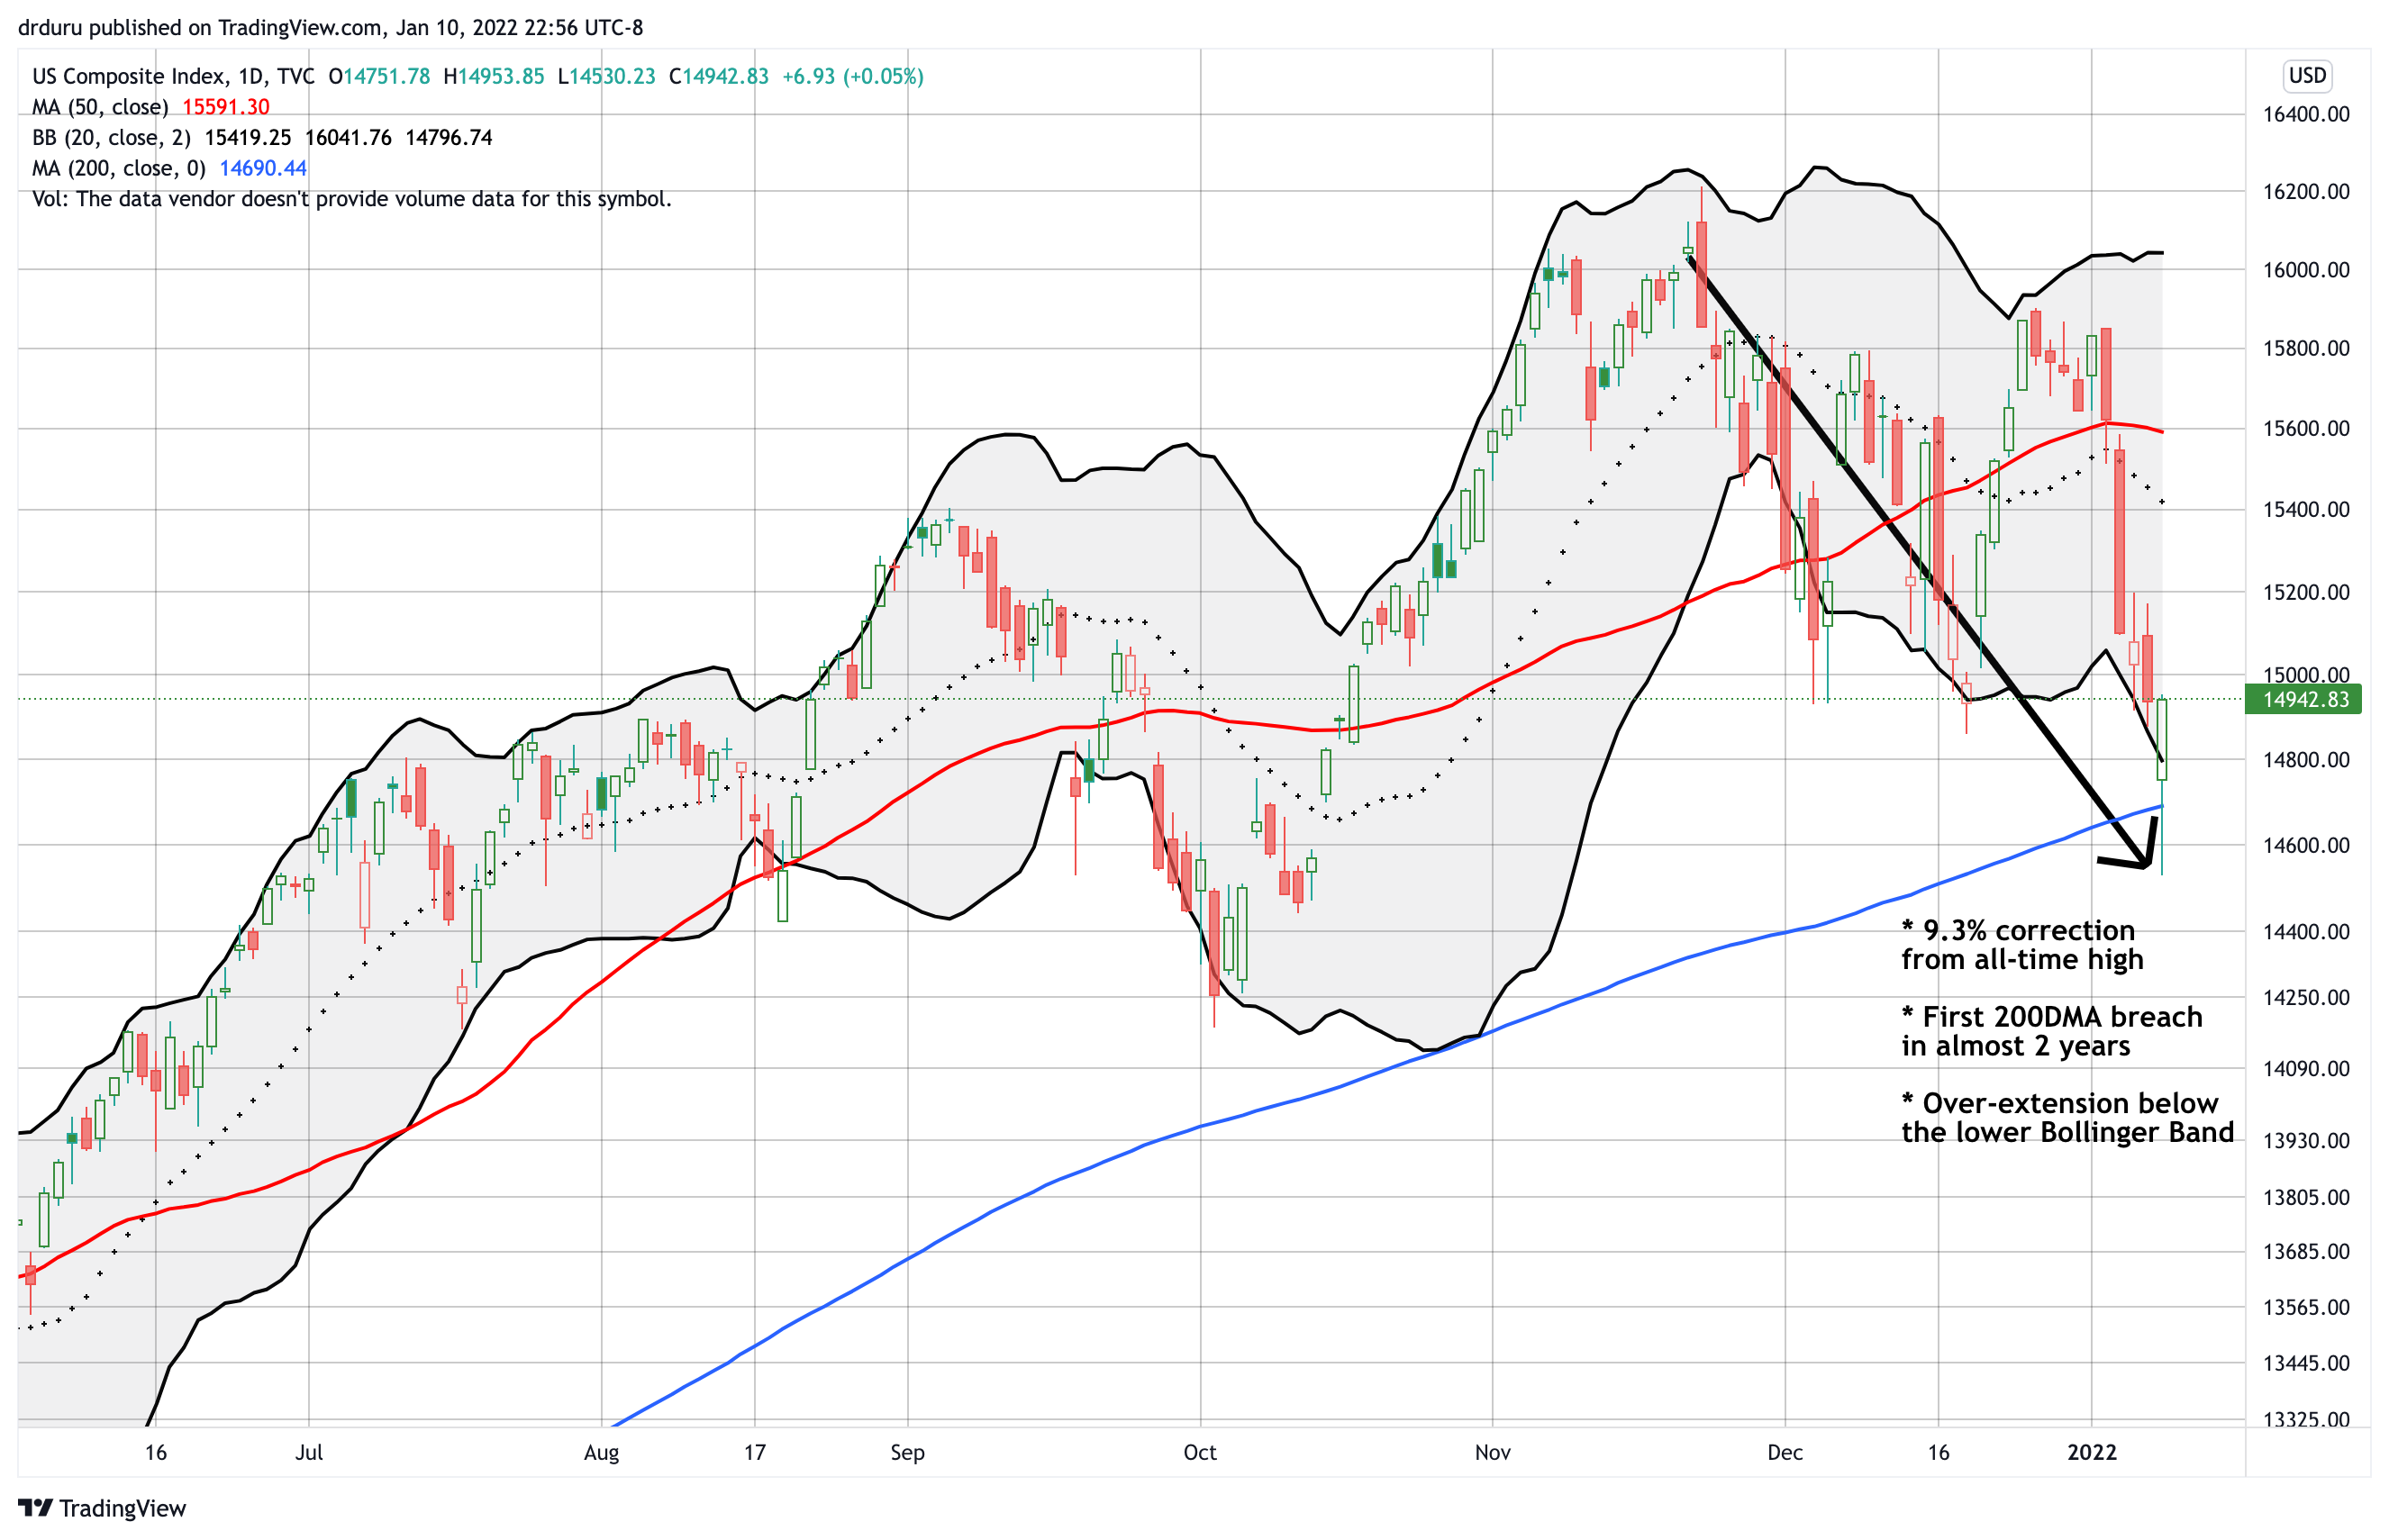 The NASDAQ (COMPQX) survived an important breach of its 200DMA and closed flat on the day.